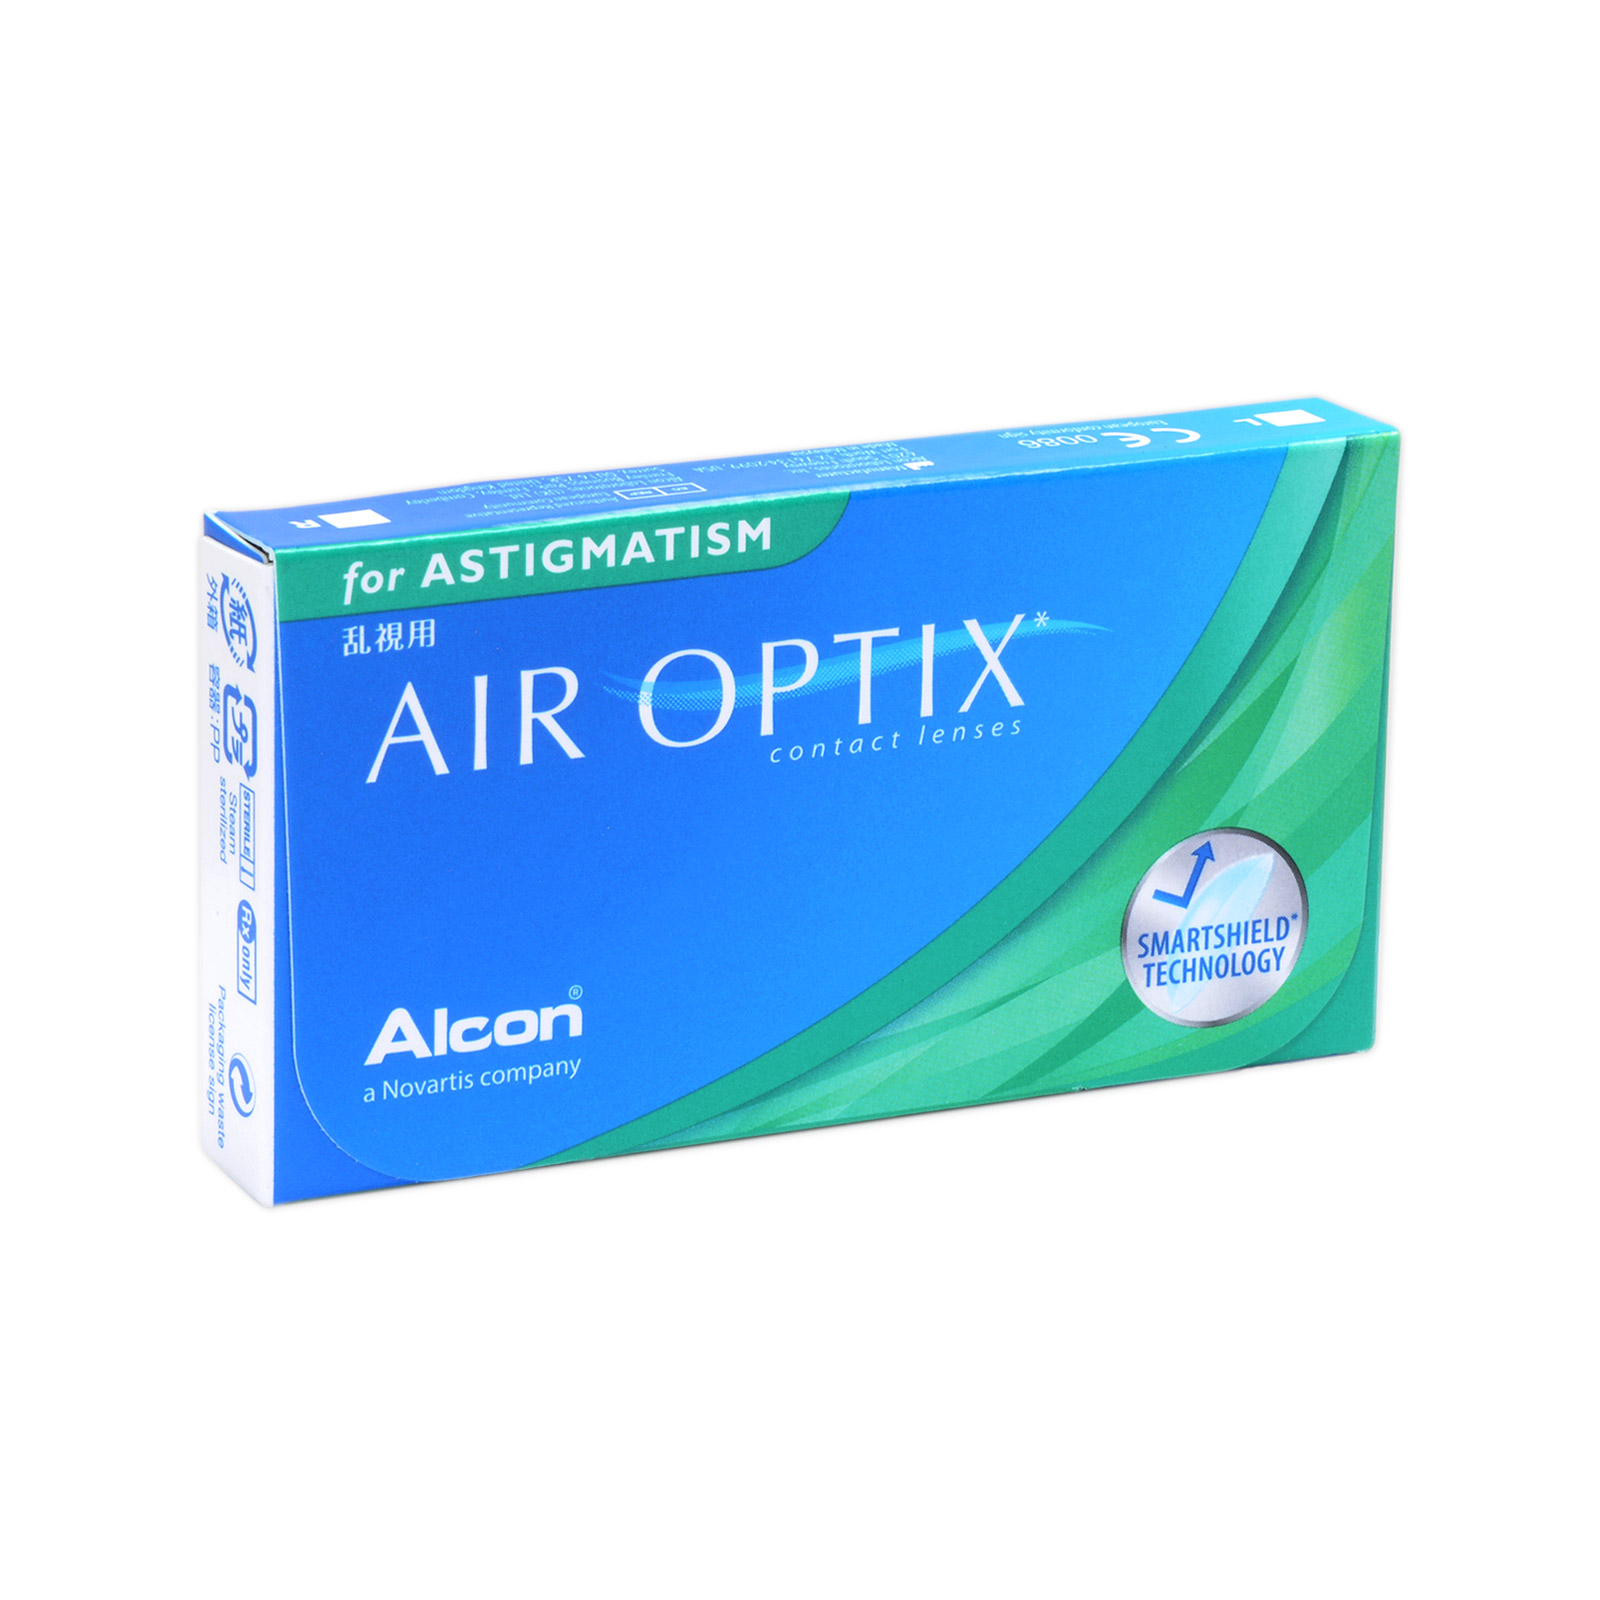 Air optix soft contacts alcon for astigmatism new jersey cognizant